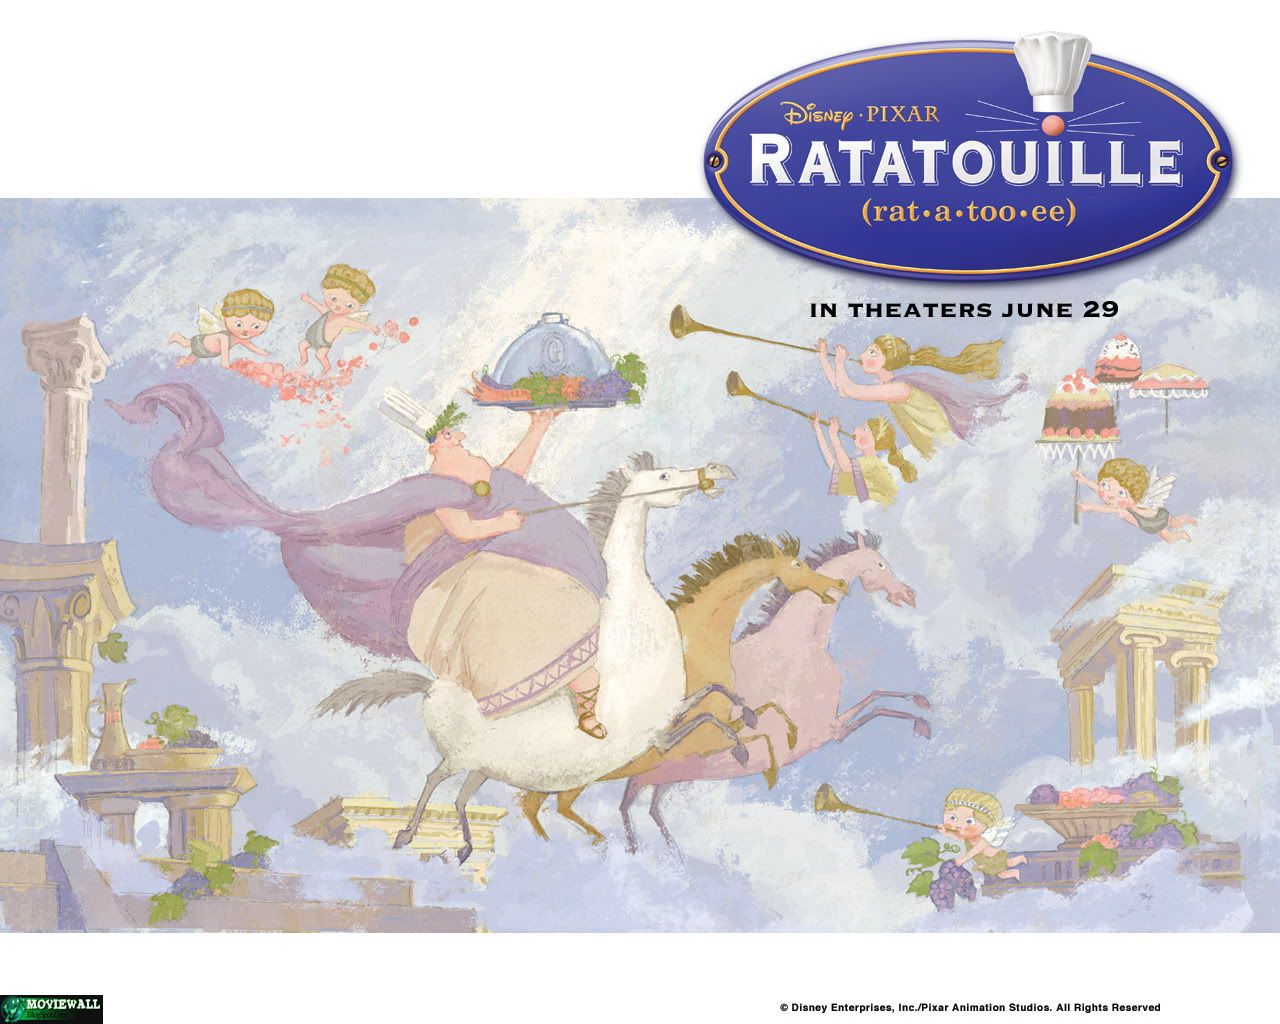 Moviewall - Movie Posters, Wallpapers & Trailers.: Ratatouille.